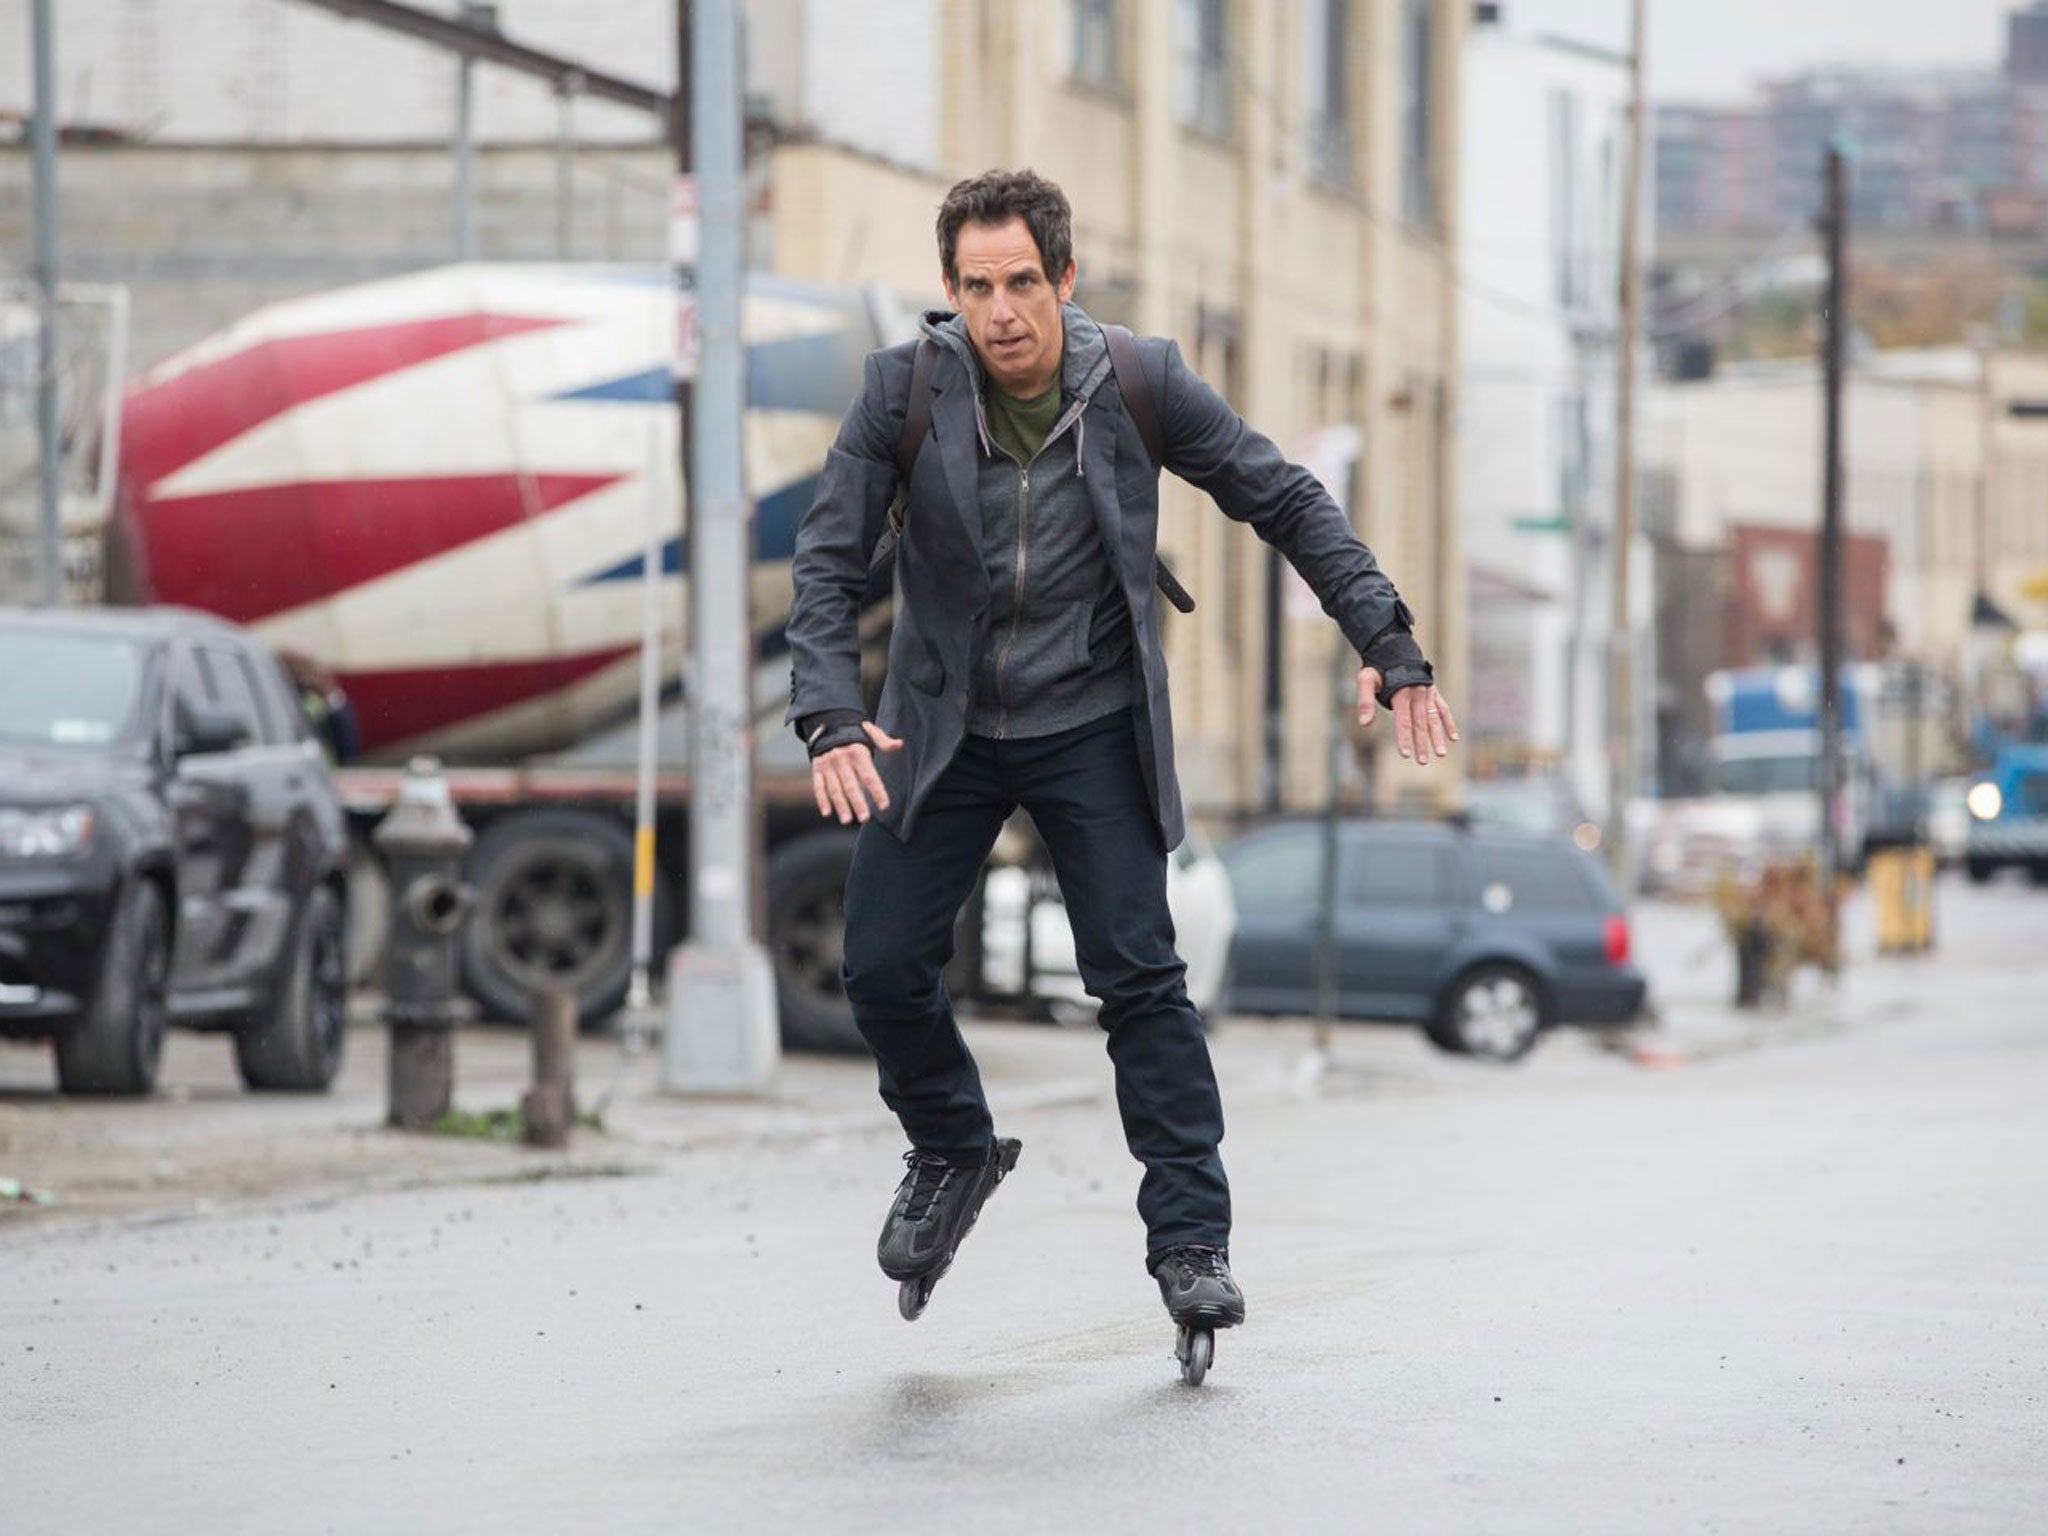 On a roll: Ben Stiller stars in the comedy drama 'While We're Young'